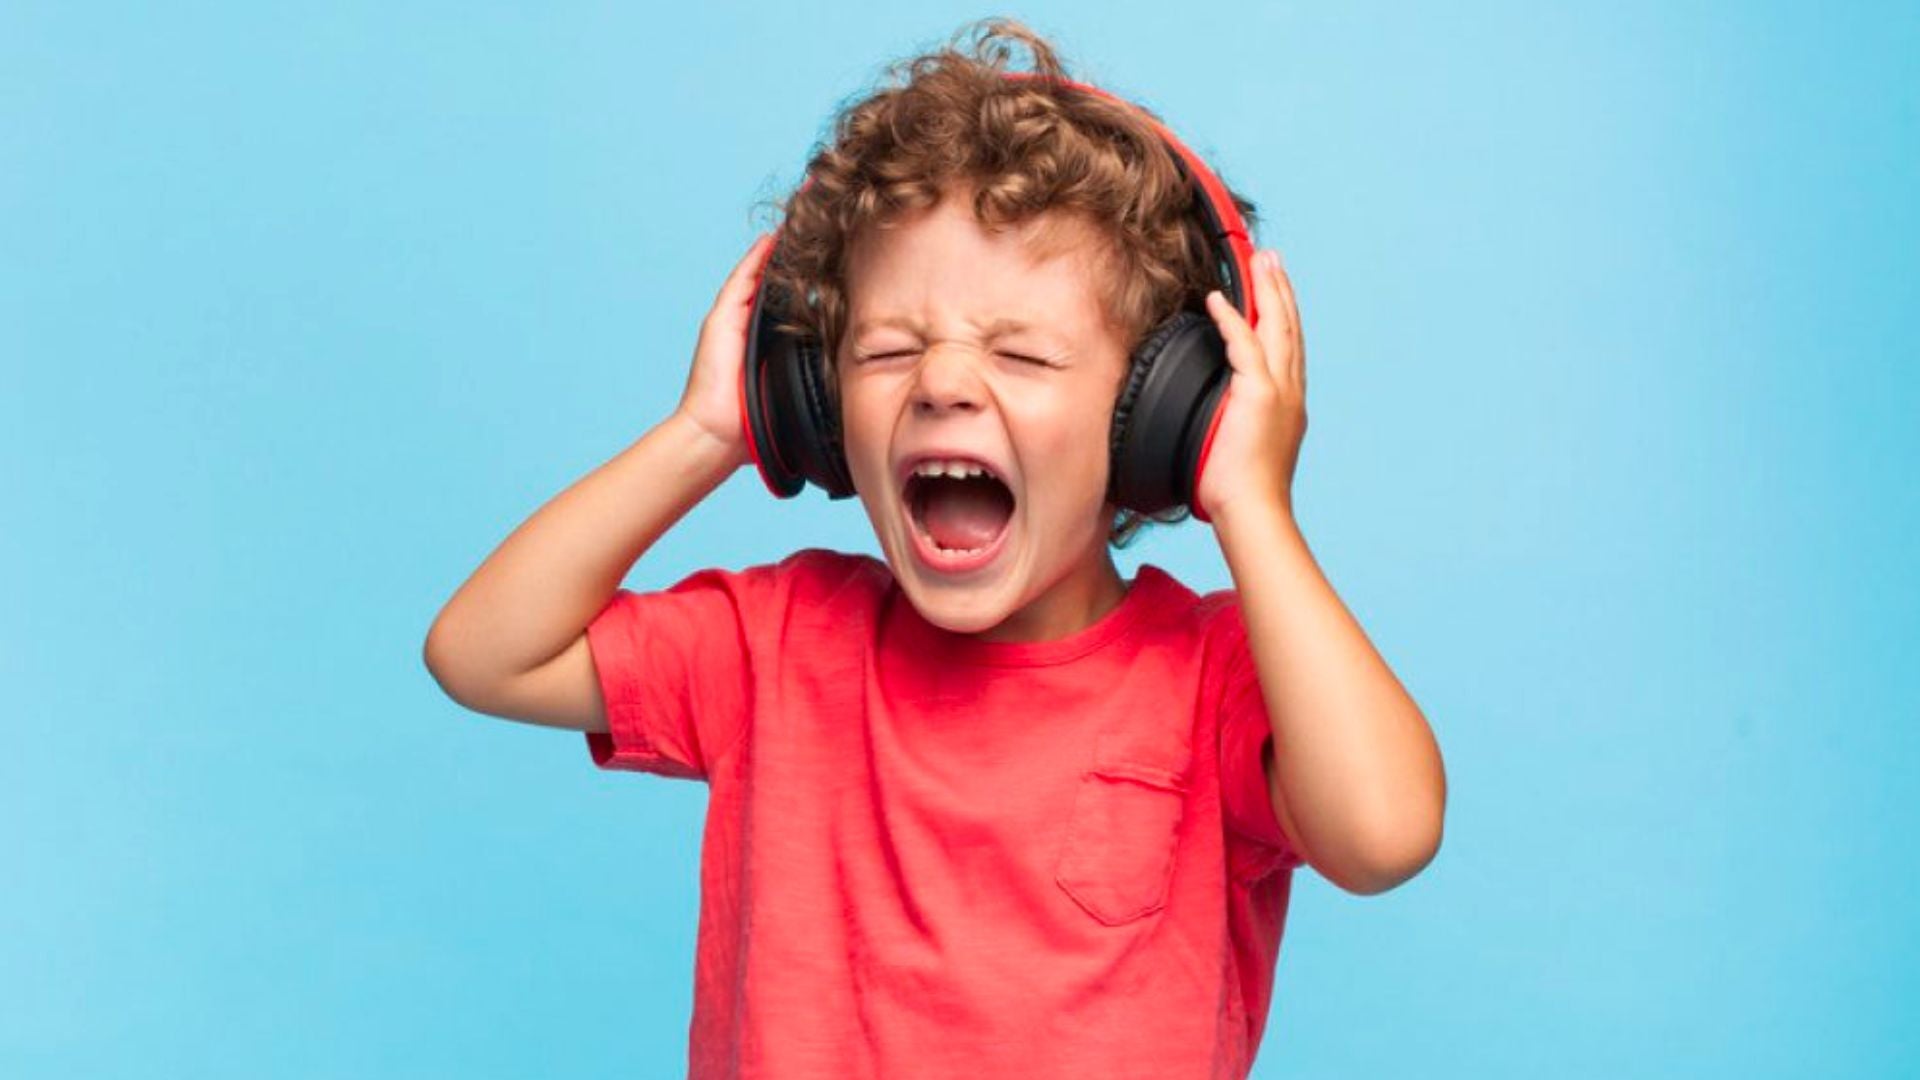 Hearing Loss Prevention: Building Awareness and Taking Action for Kids